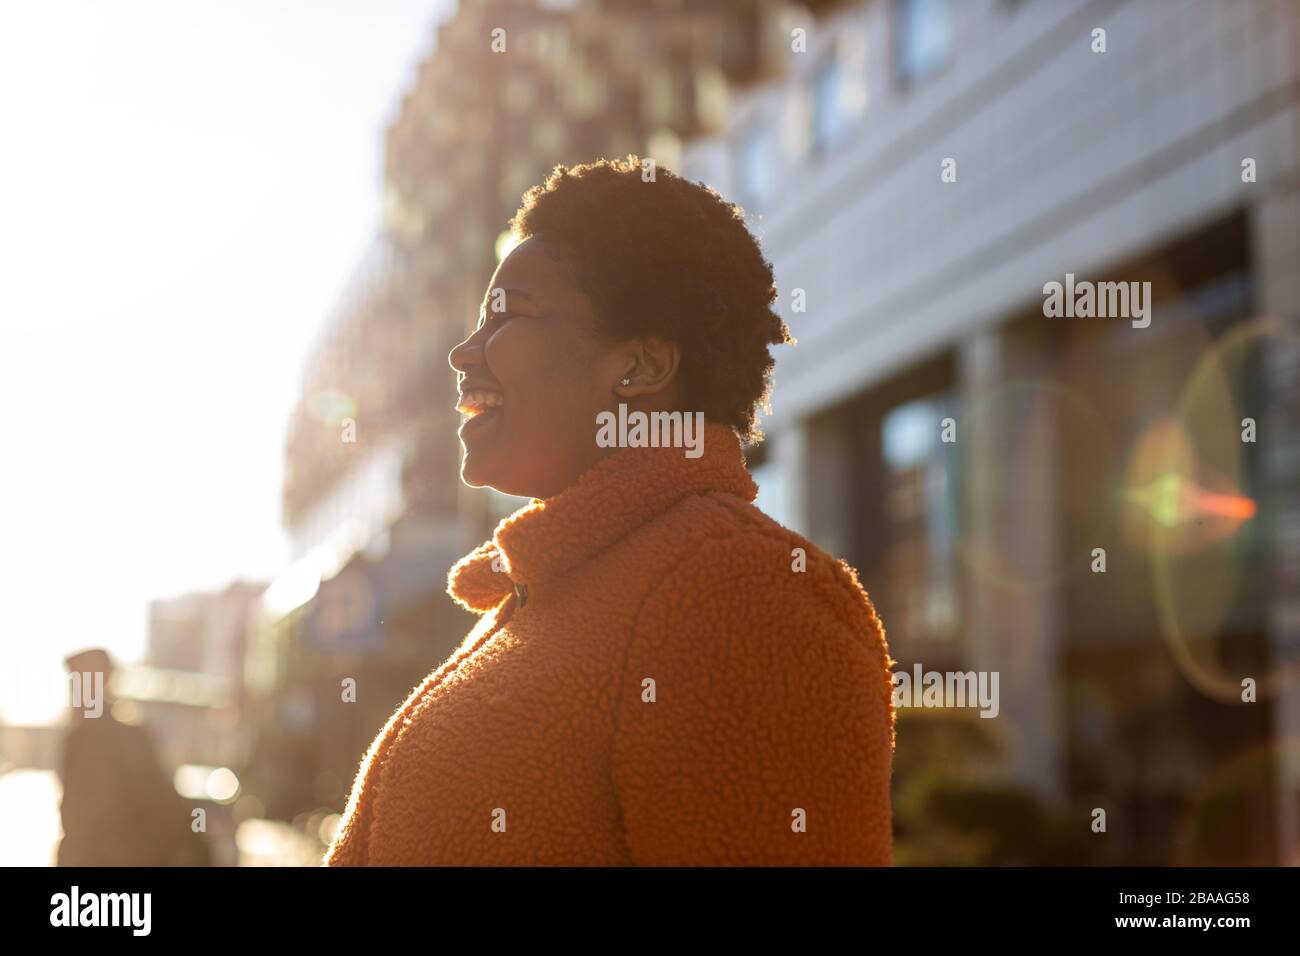 Afro american woman in an urban city area Stock Photo